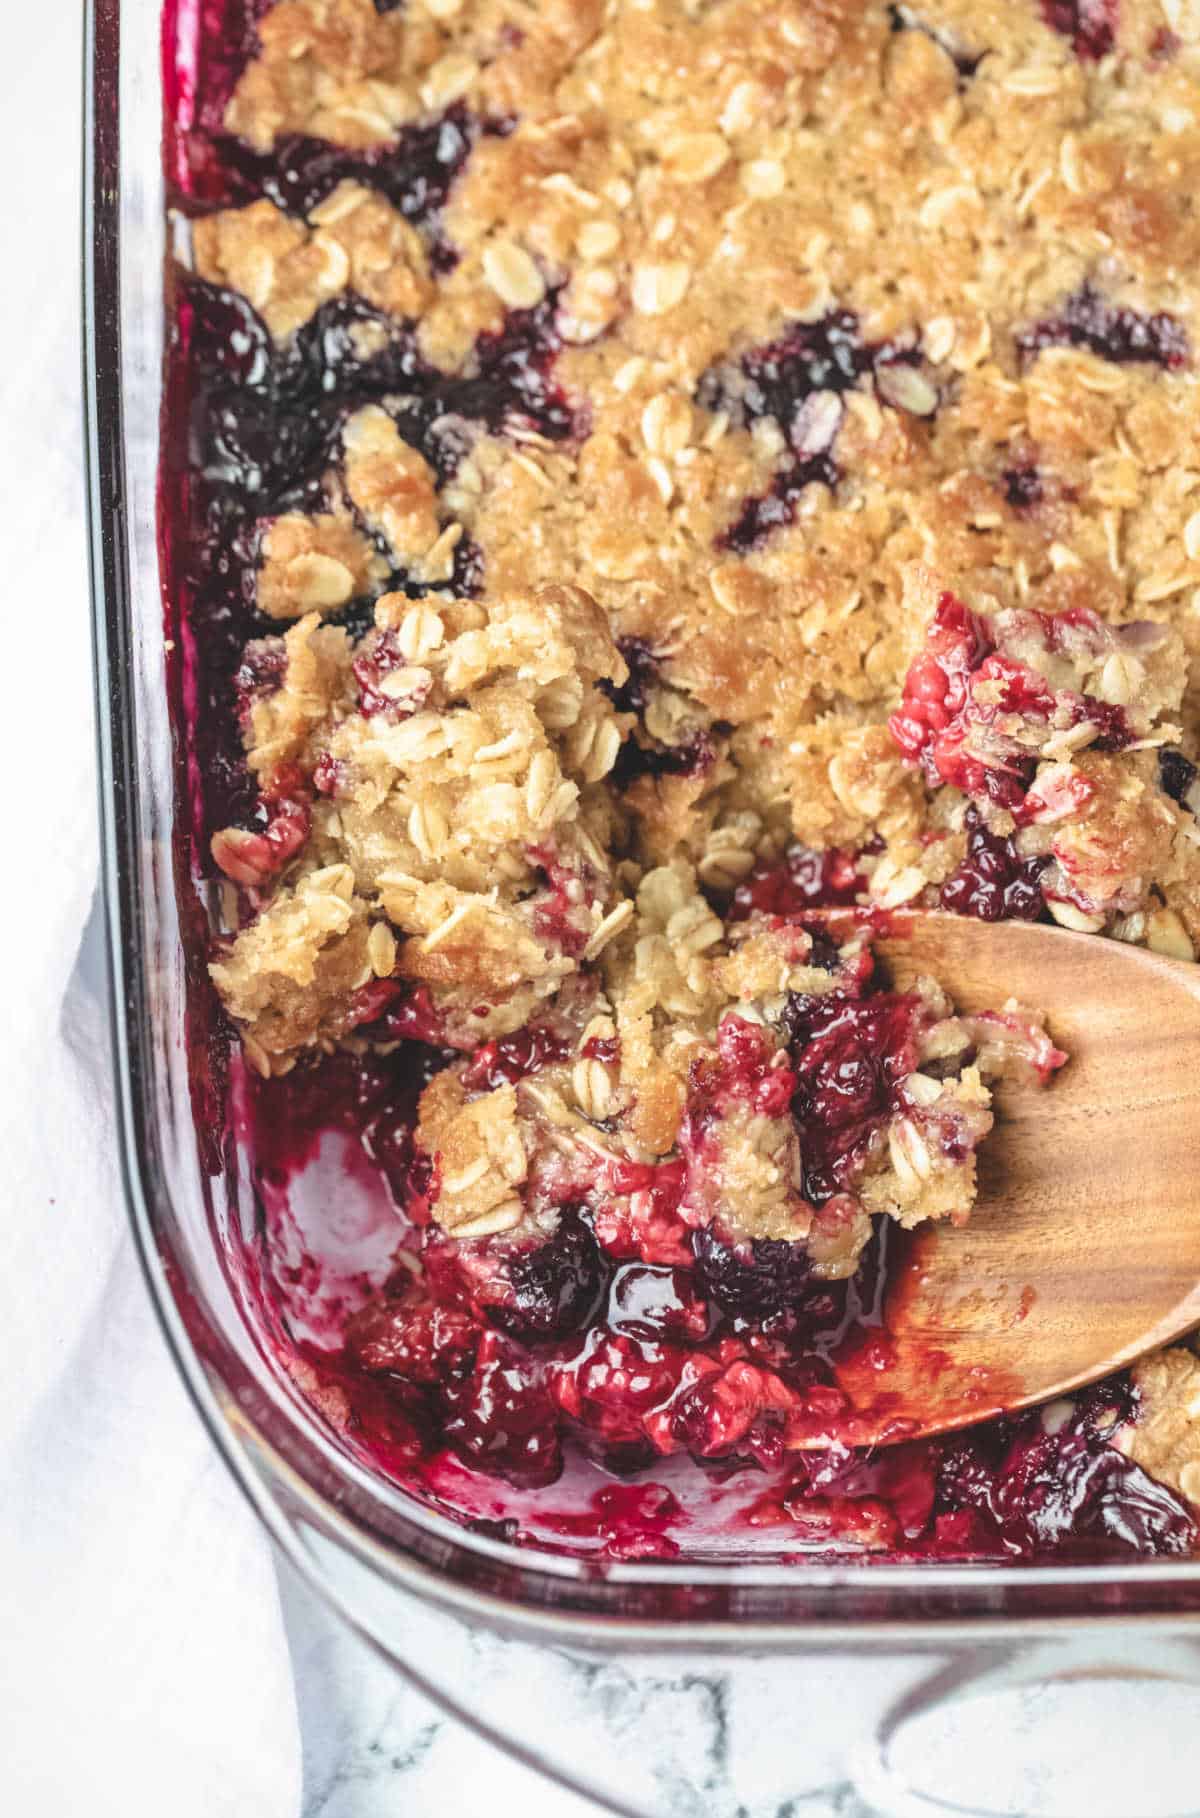 A wooden spoon scooping up triple berry crisp.